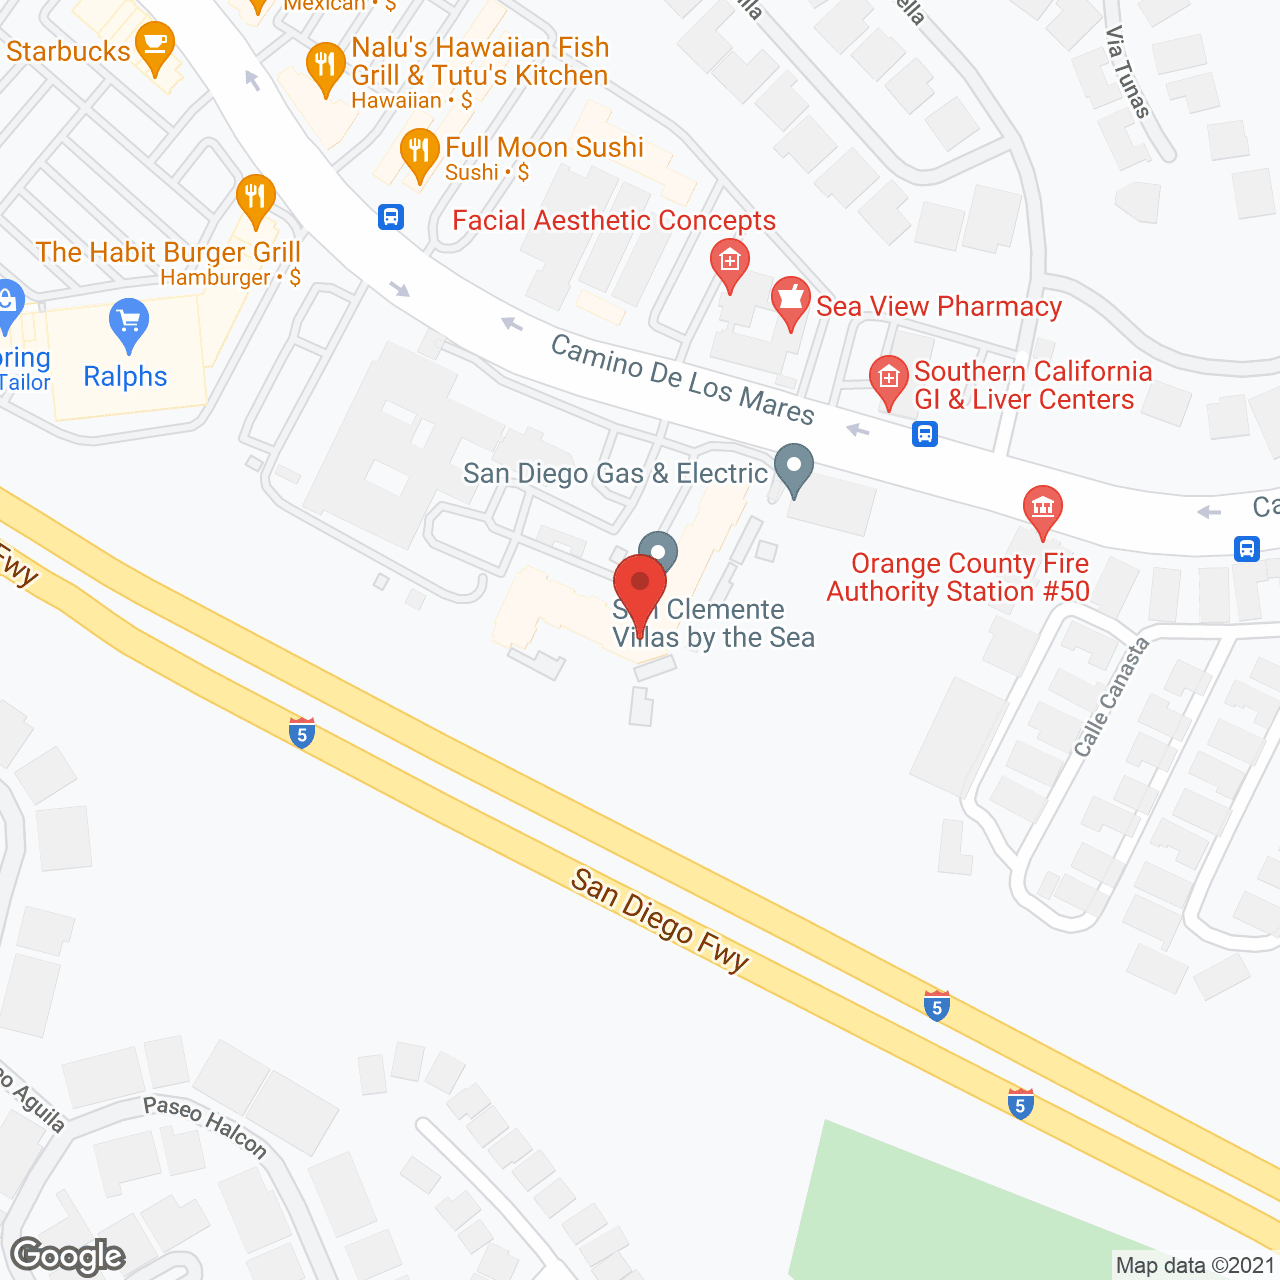 San Clemente Villas By the Sea in google map